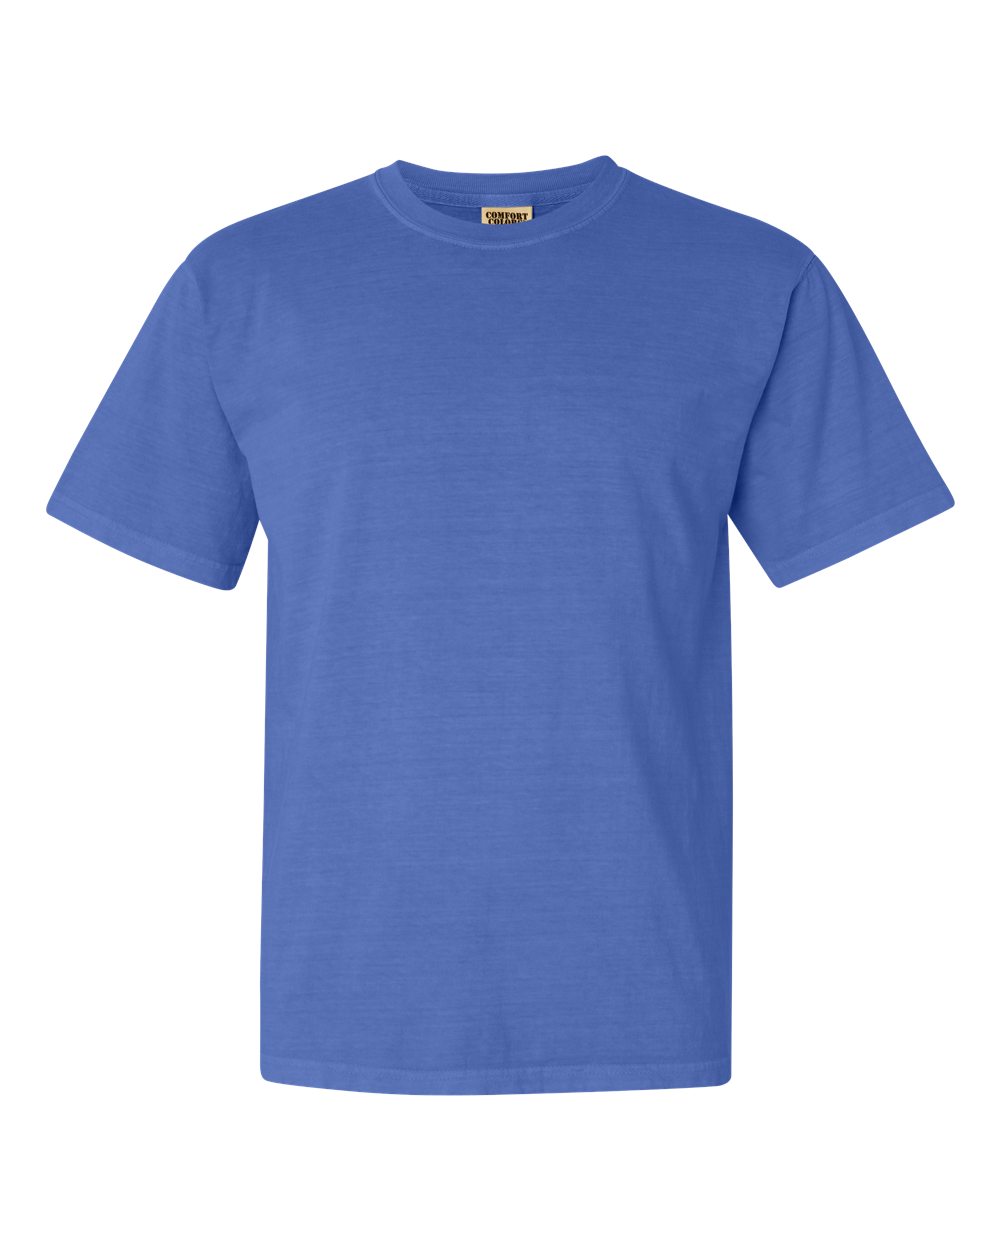 Comfort Colors Garment-Dyed Tee (1717) in Flo Blue